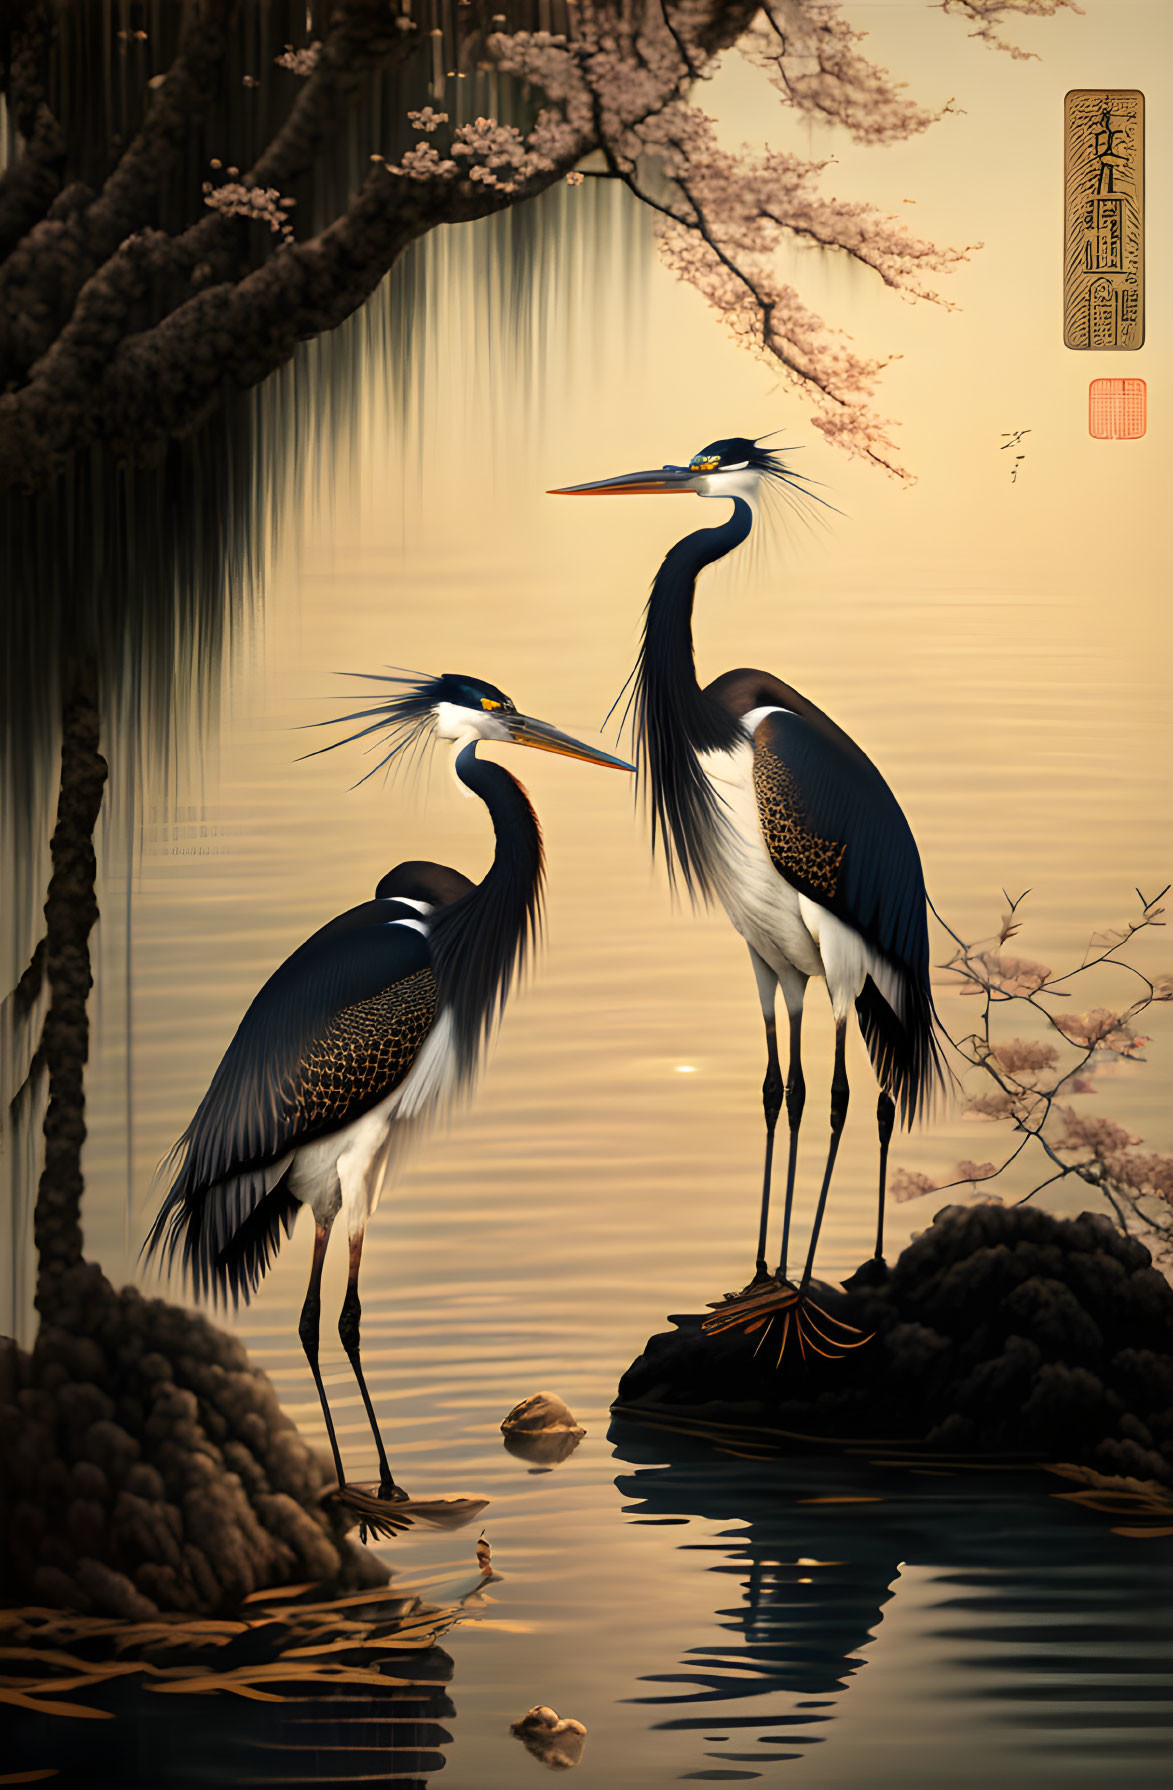 Tranquil Asian art: Two herons by serene lake at sunset